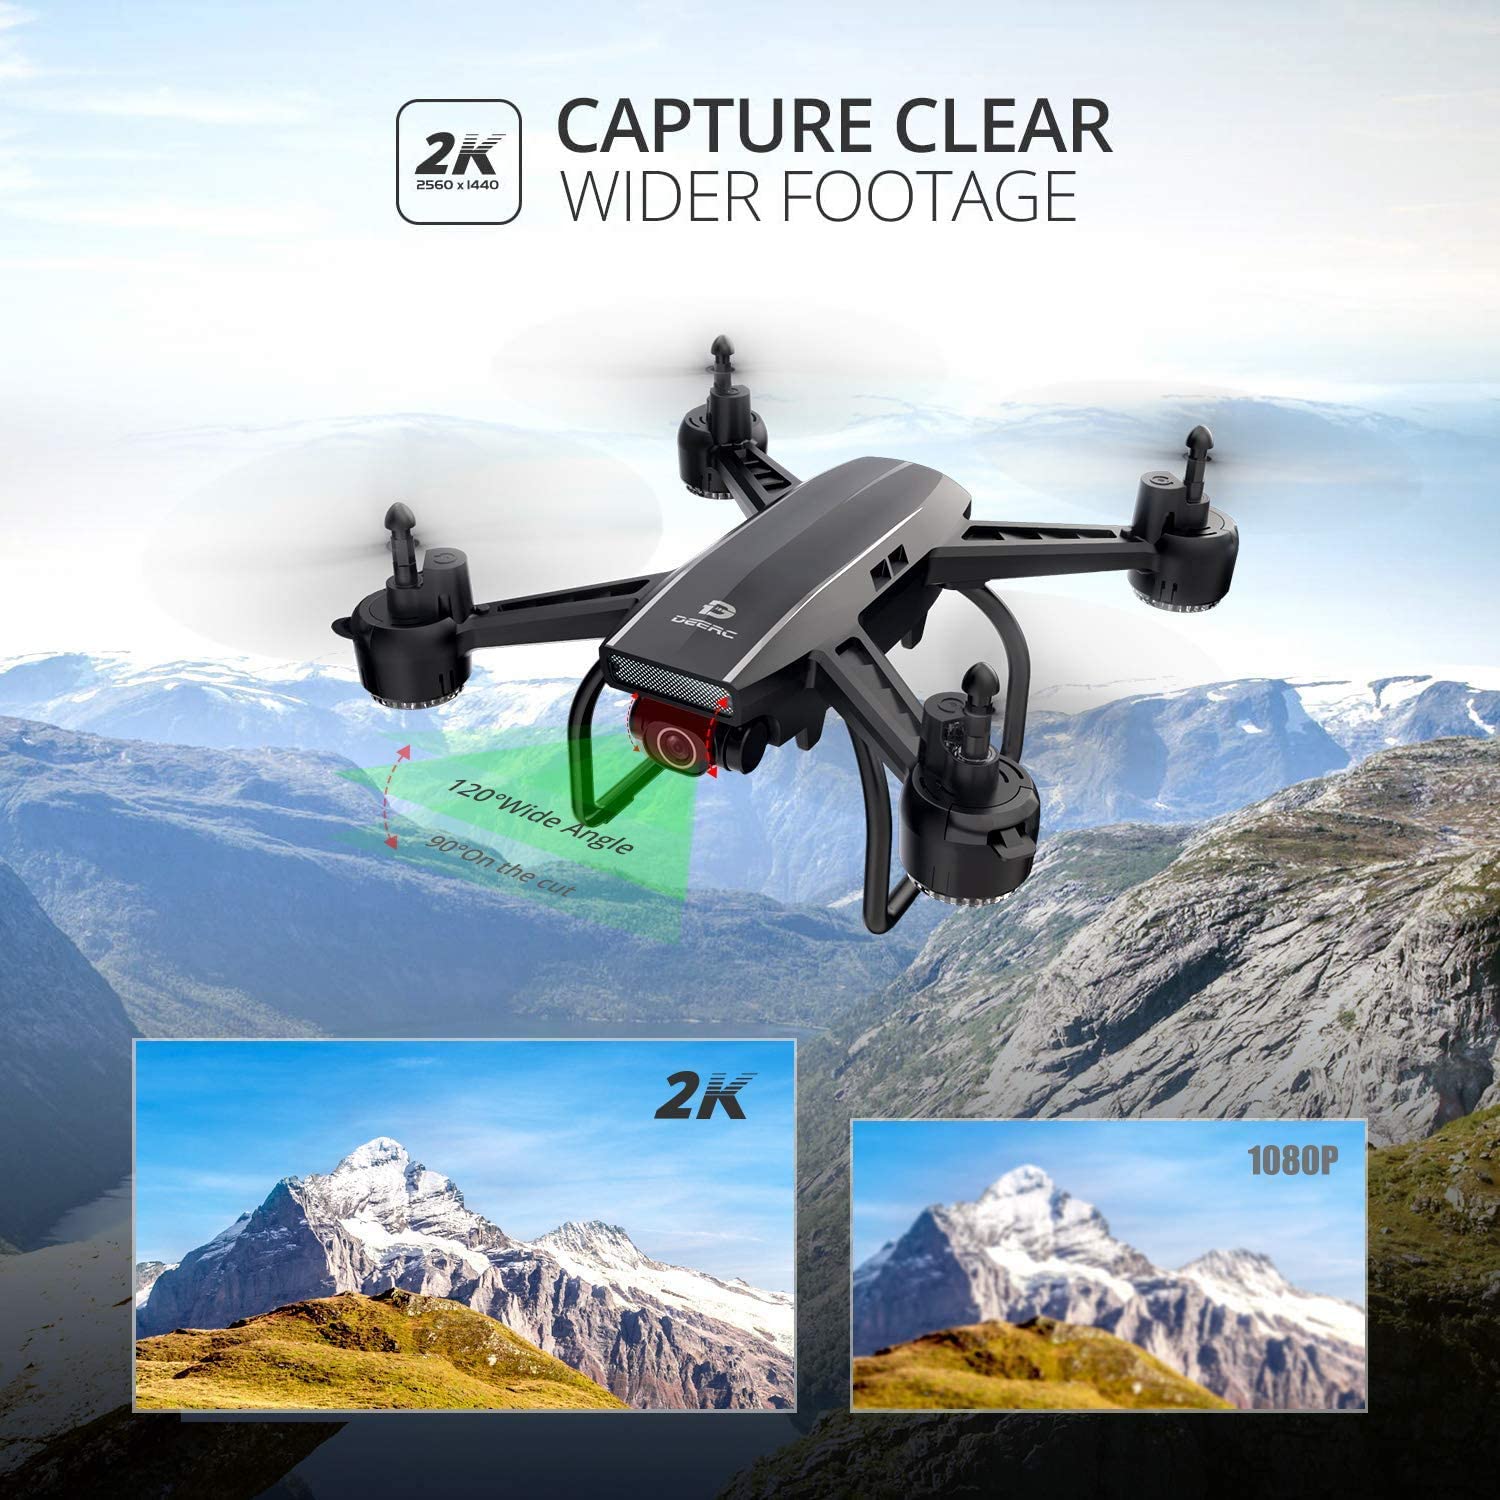 DEERC D50 Drone for Adults with 2K UHD Camera FPV Live Video 120 FOV 2 Batteries